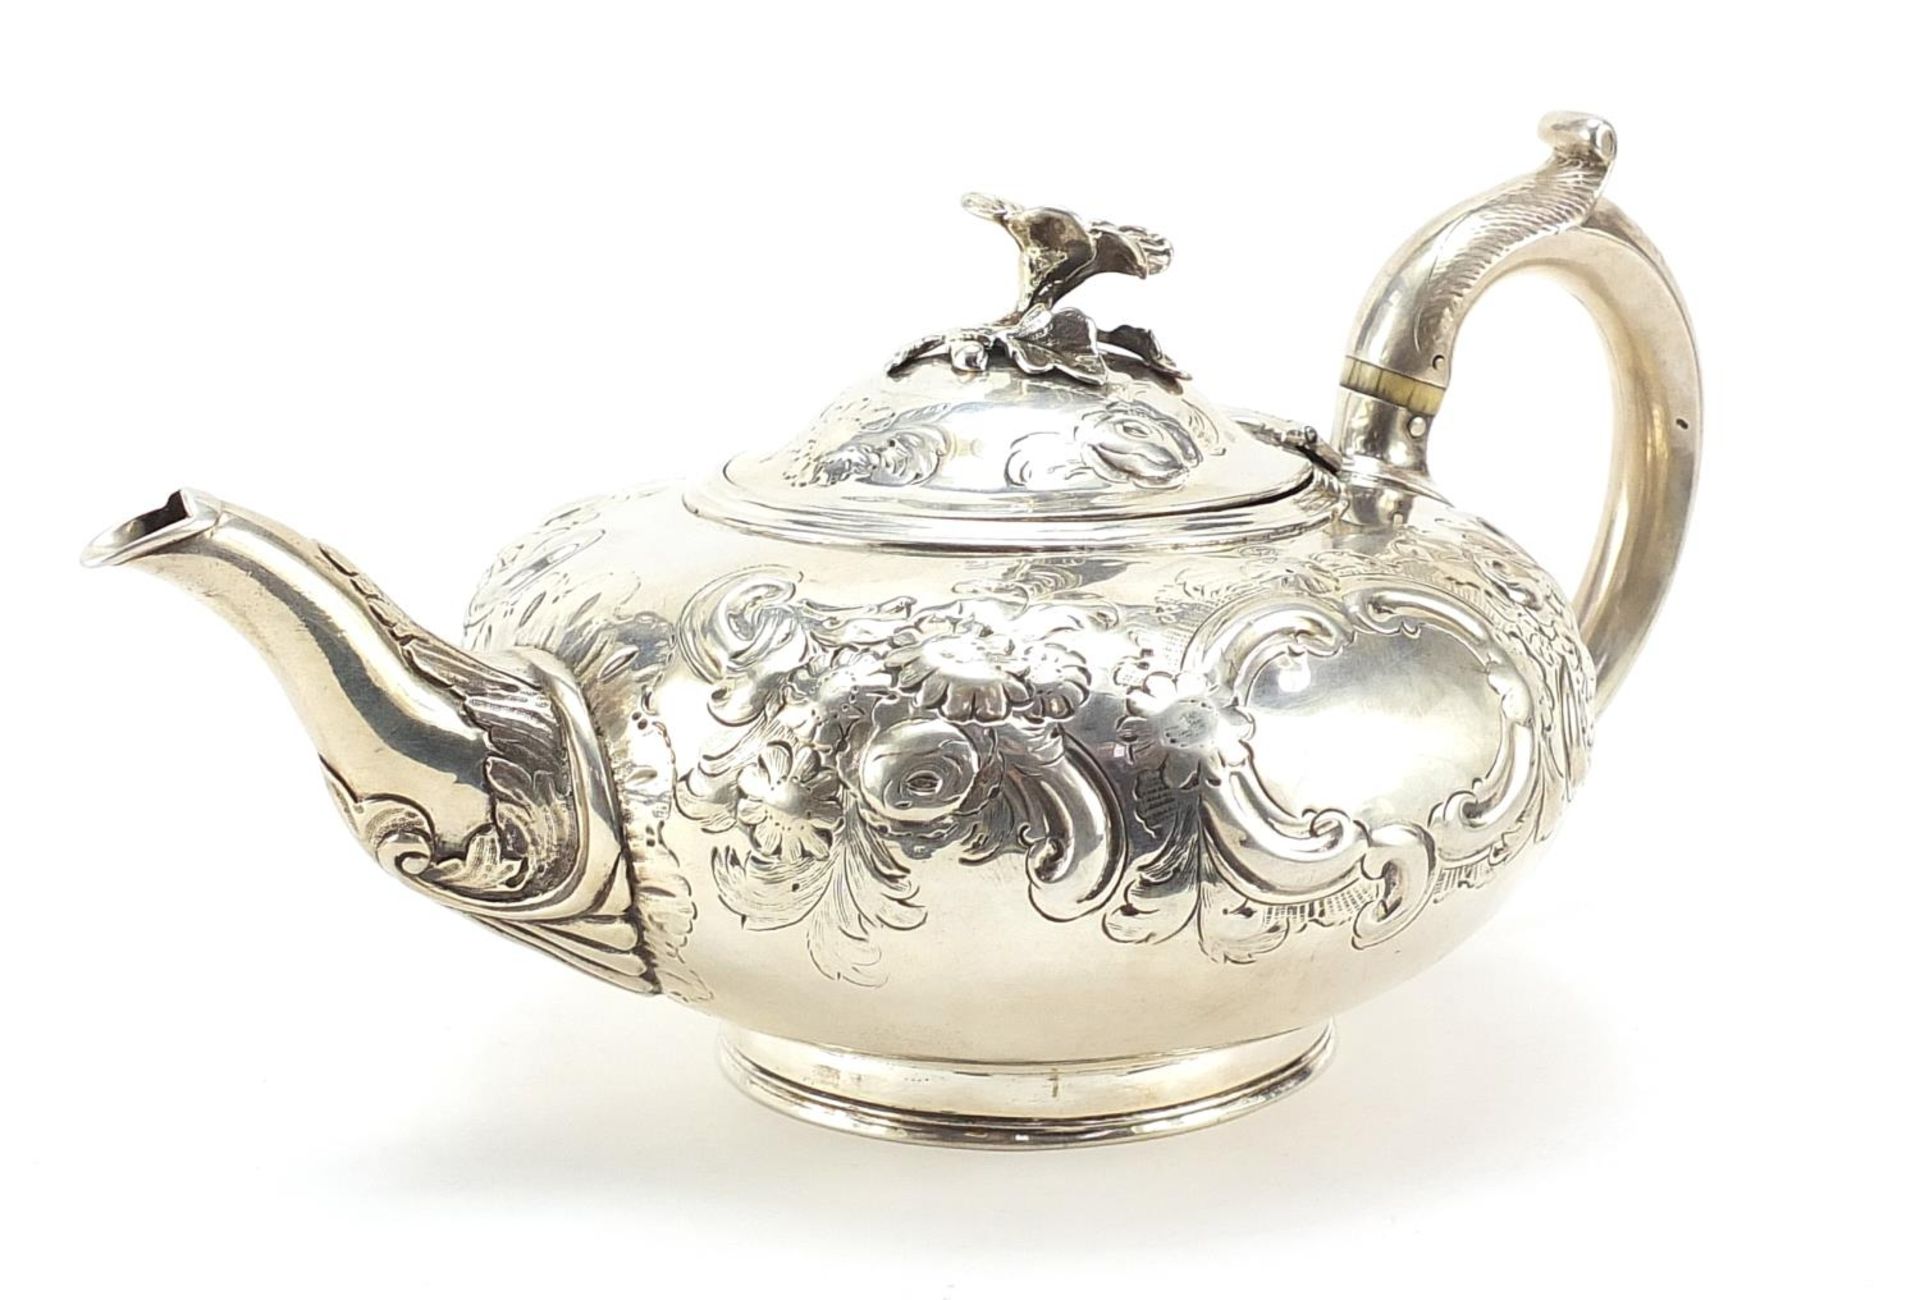 Daniel & Charles Houle, Victorian silver teapot embossed with flowers and blank cartouches, London